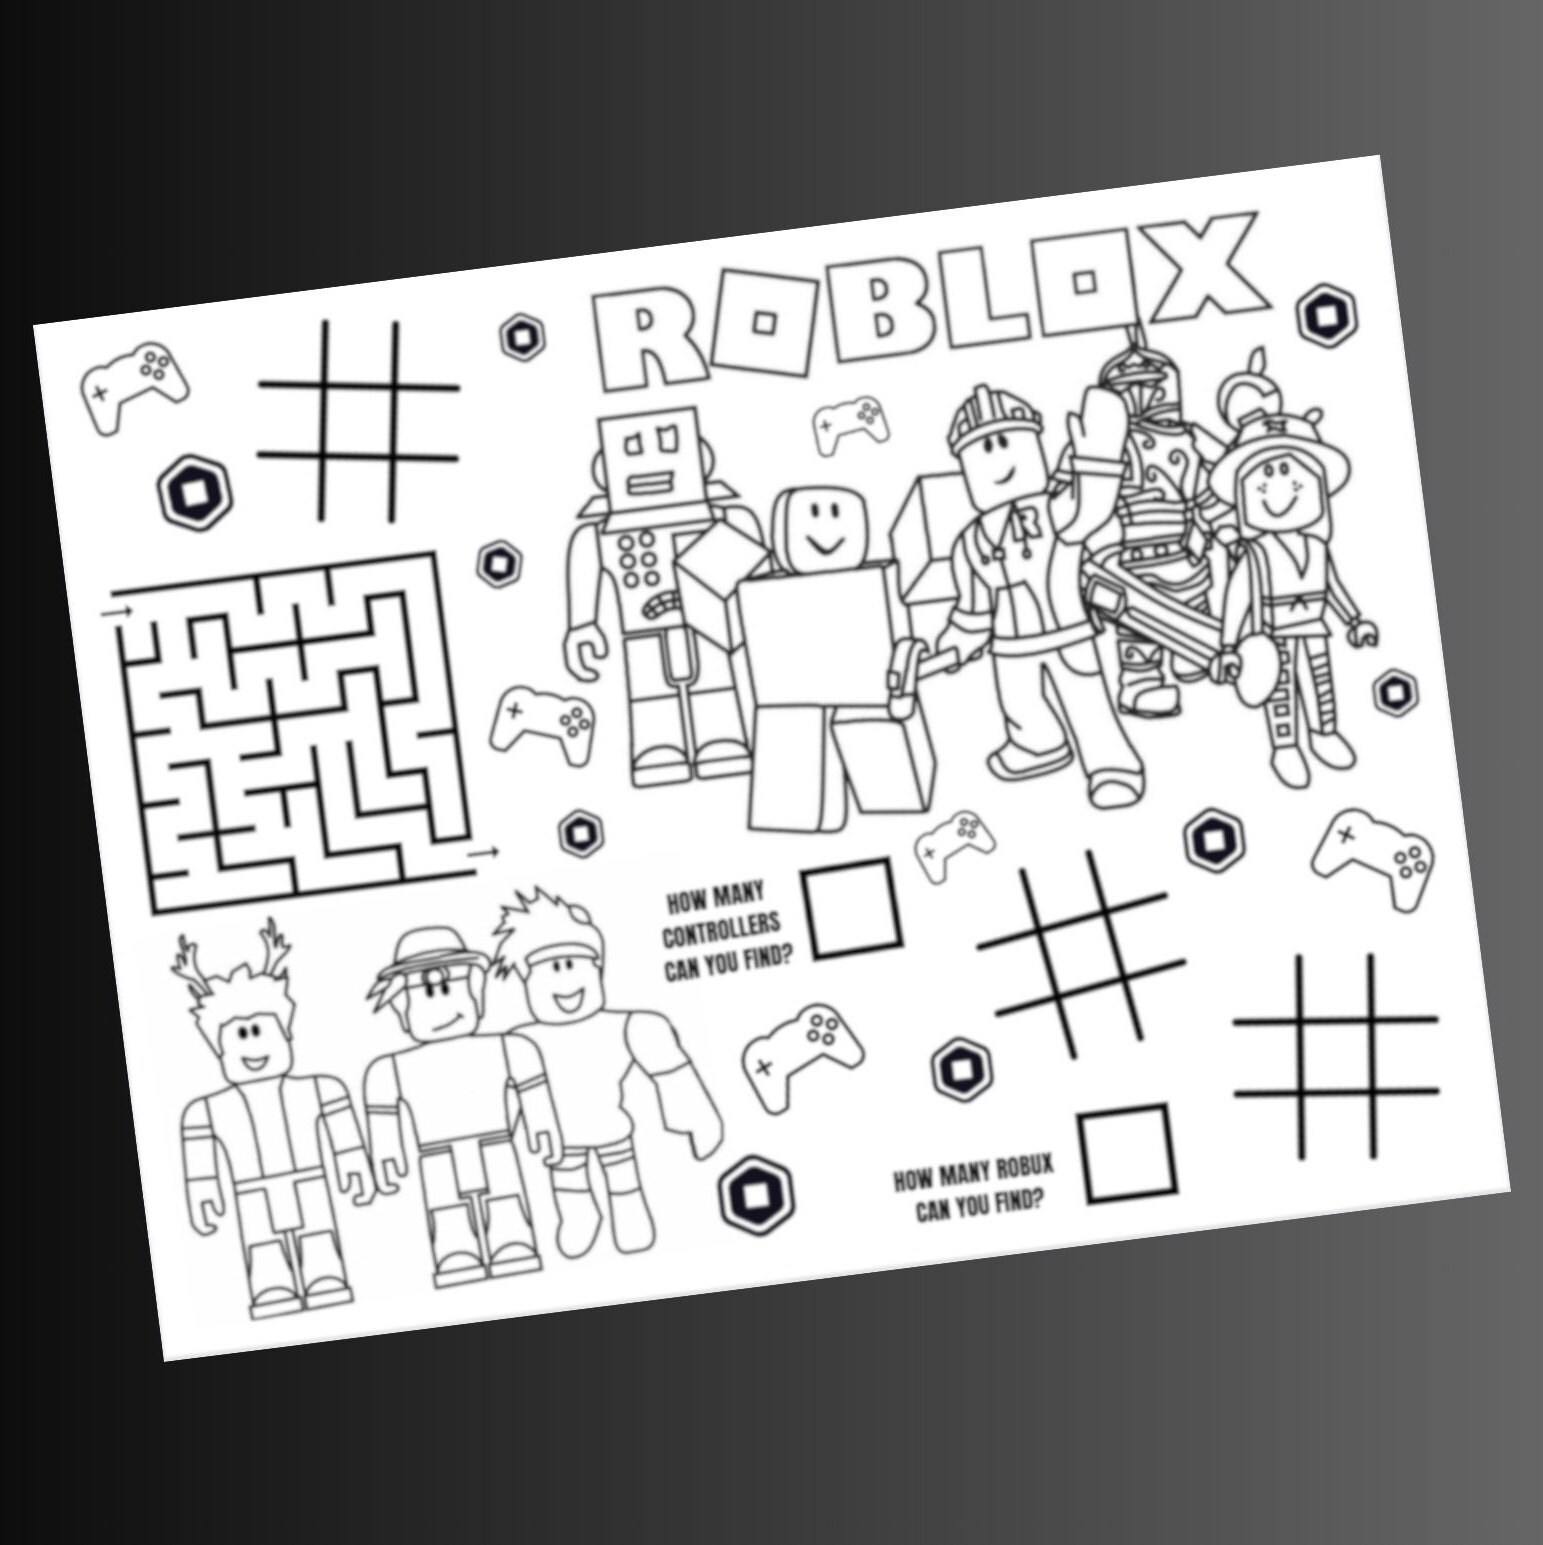 43 Product Pitures ideas  coloring placemats, placemats, roblox